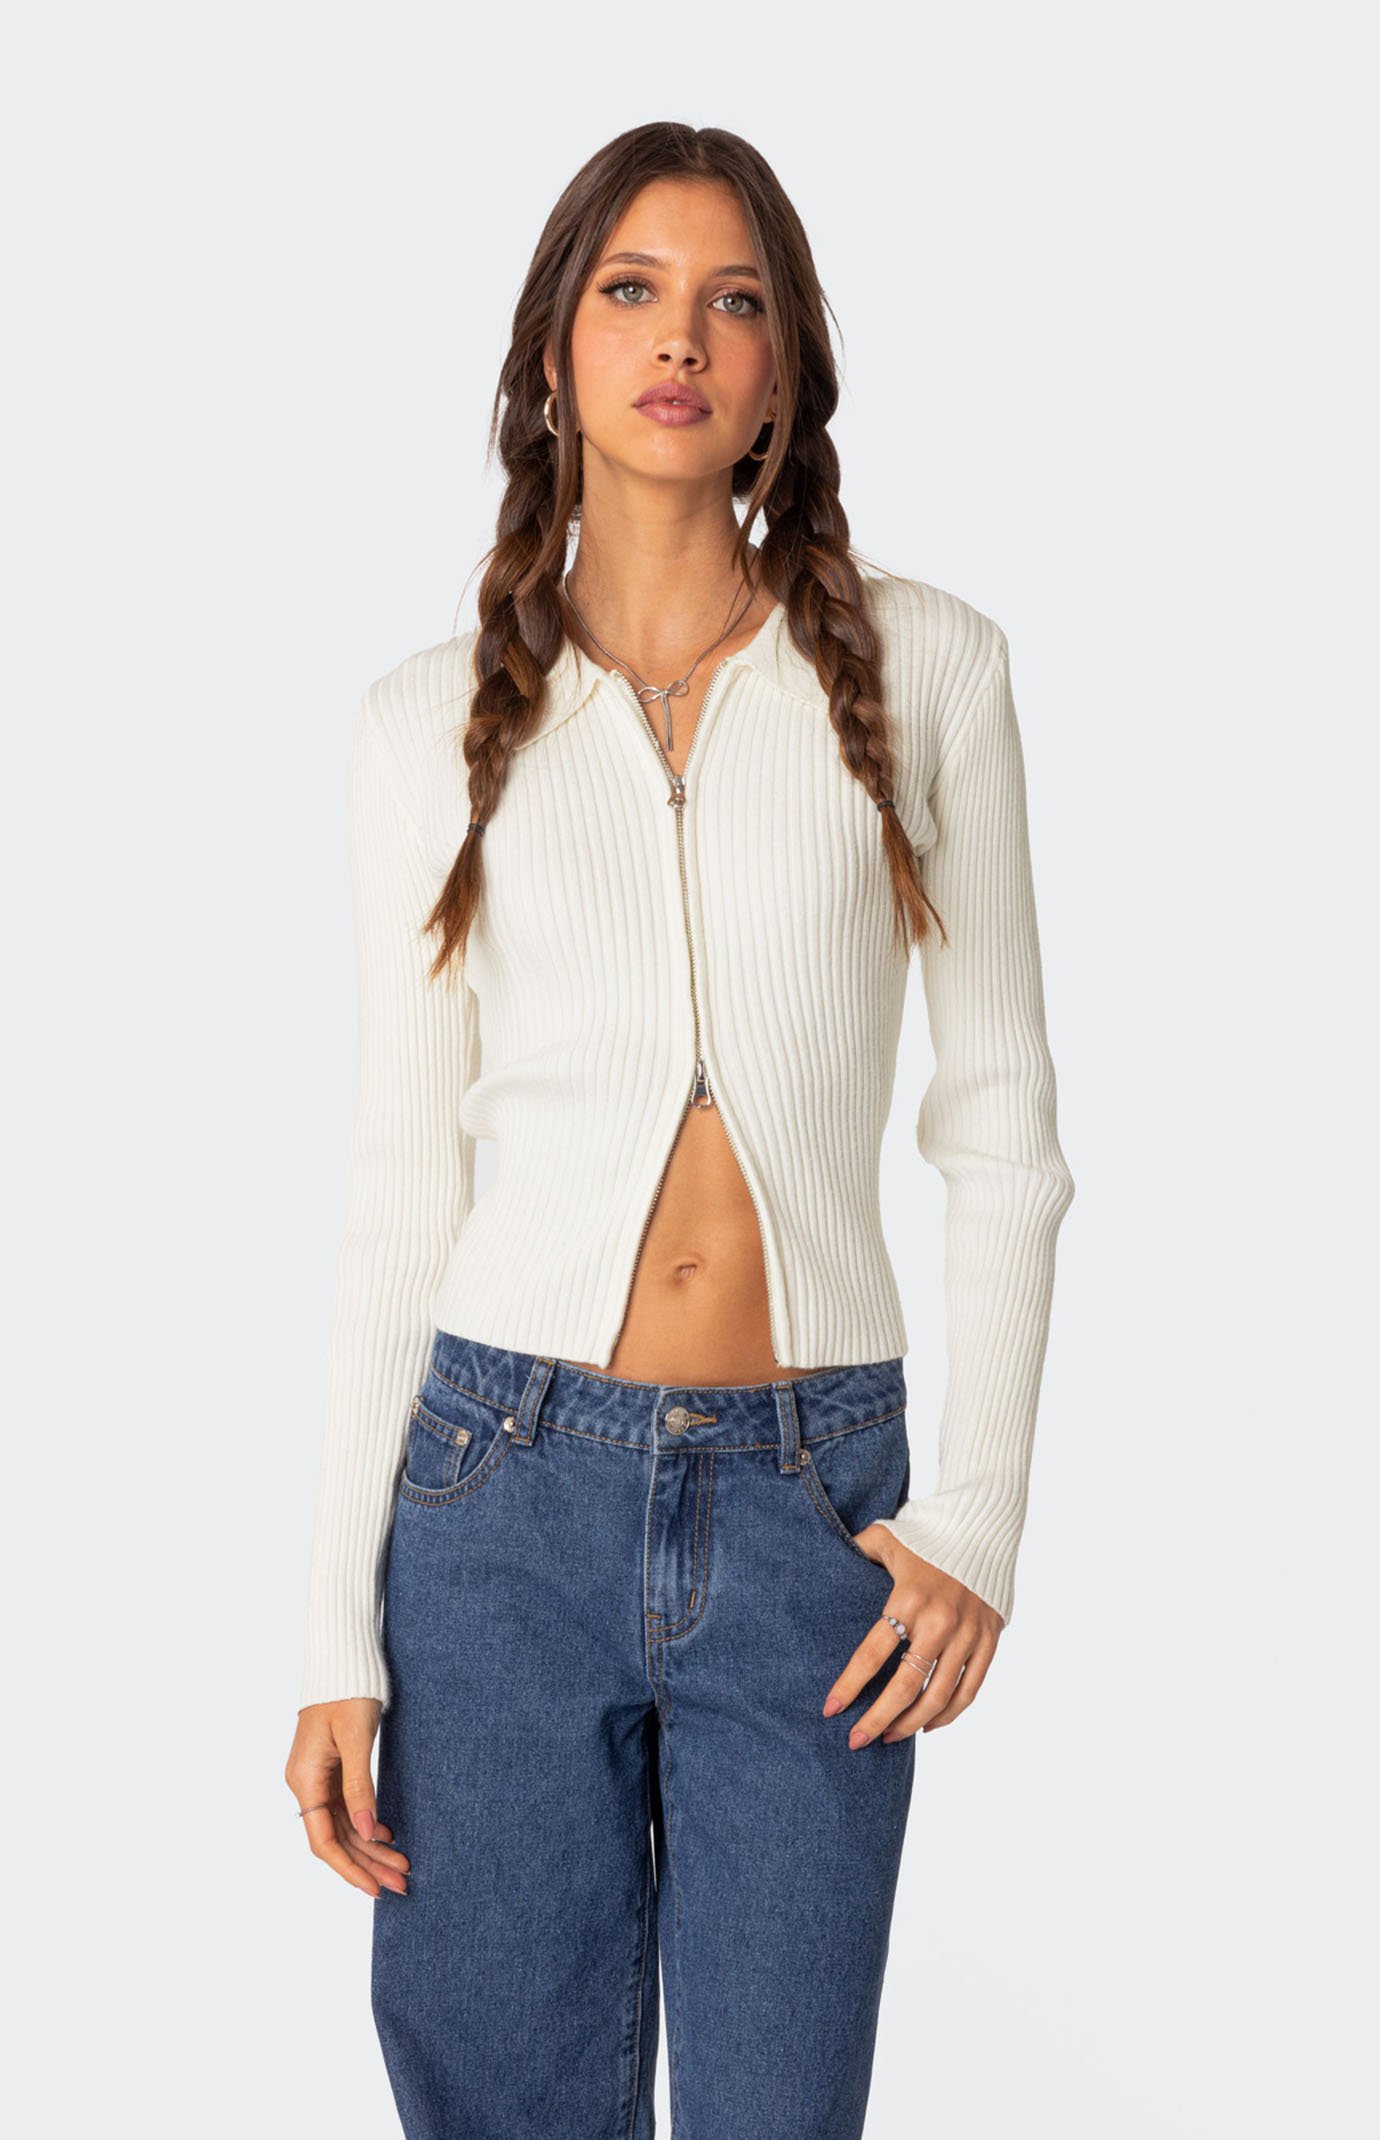 Knitted Up | Cardigan PacSun Edikted Cora Zip